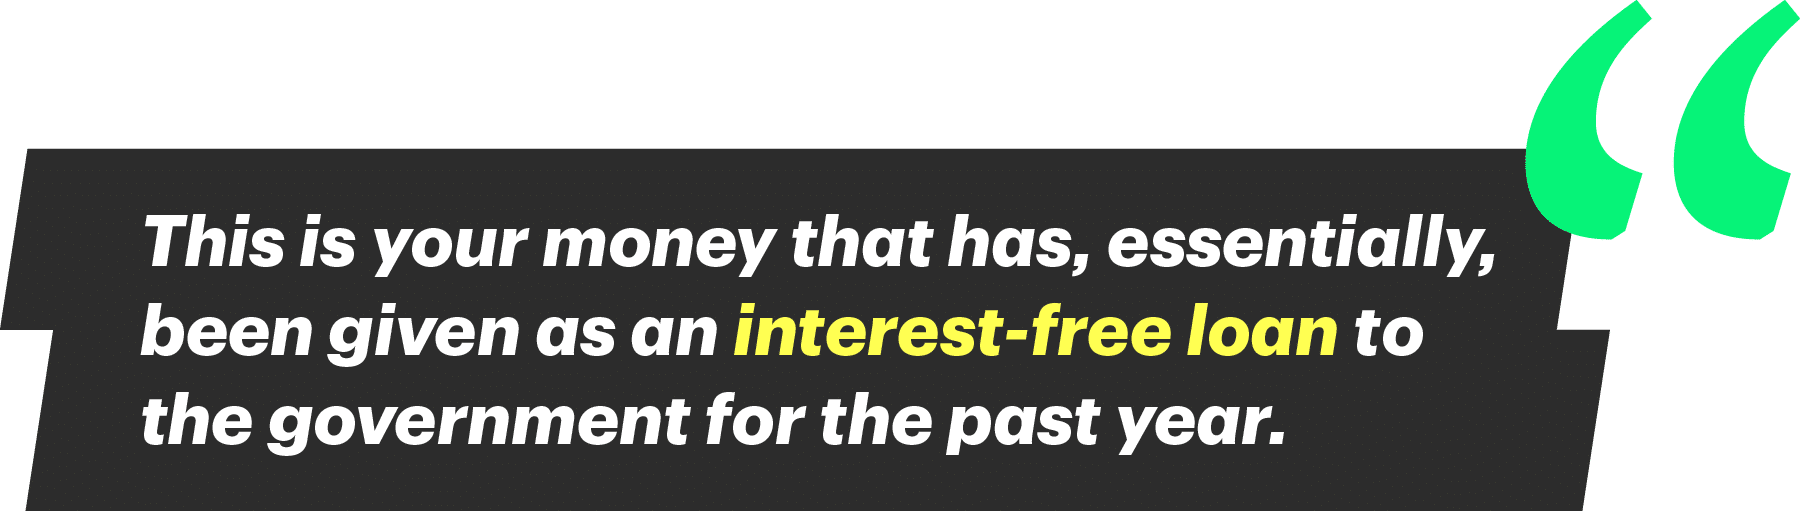 “This is your money that has, essentially, been given as an interest-free loan to the government for the past year."